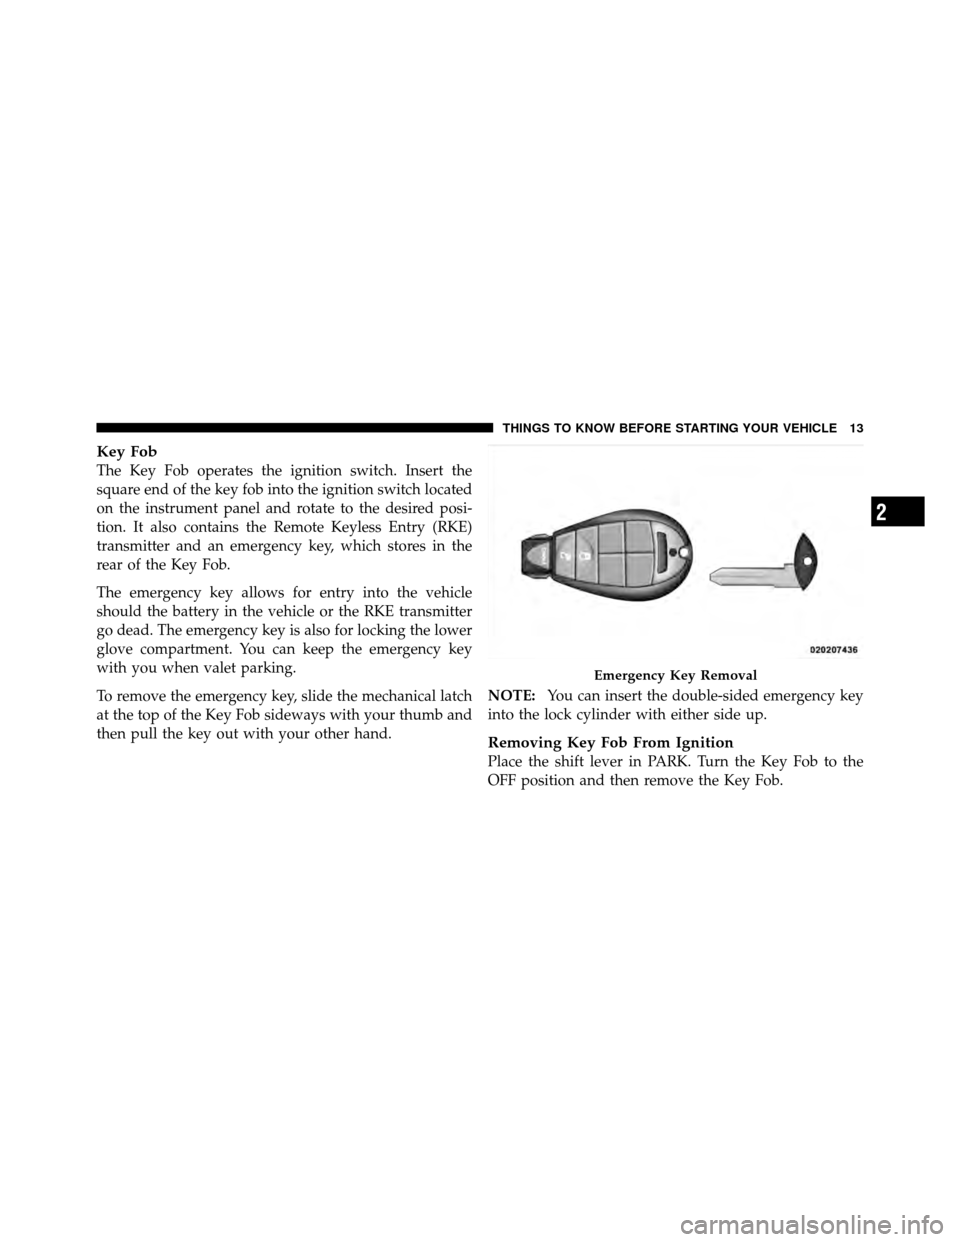 CHRYSLER TOWN AND COUNTRY 2011 5.G Owners Manual Key Fob
The Key Fob operates the ignition switch. Insert the
square end of the key fob into the ignition switch located
on the instrument panel and rotate to the desired posi-
tion. It also contains t